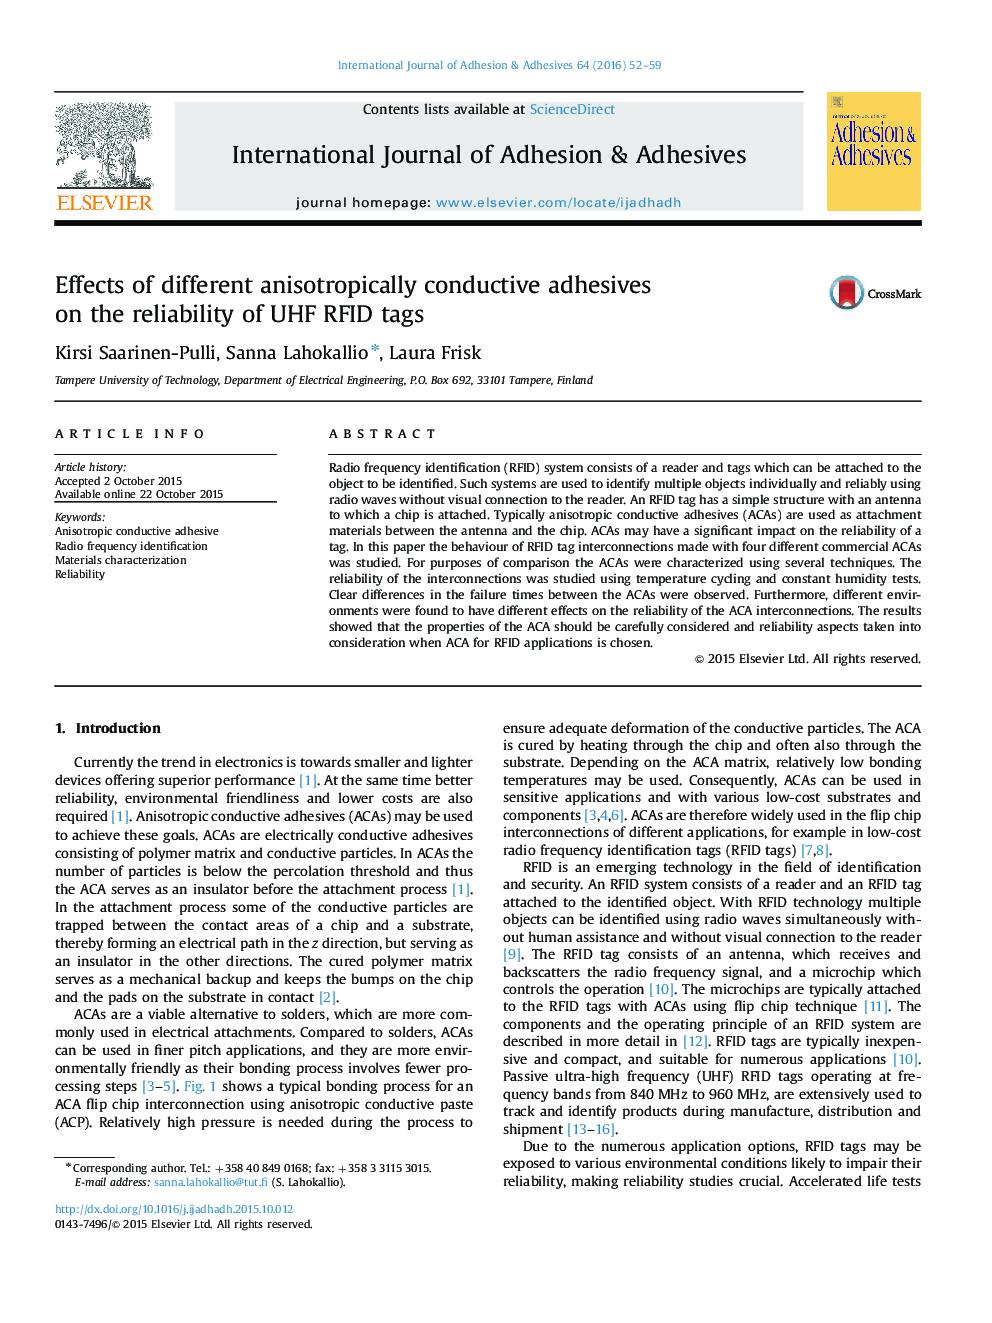 Effects of different anisotropically conductive adhesives on the reliability of UHF RFID tags